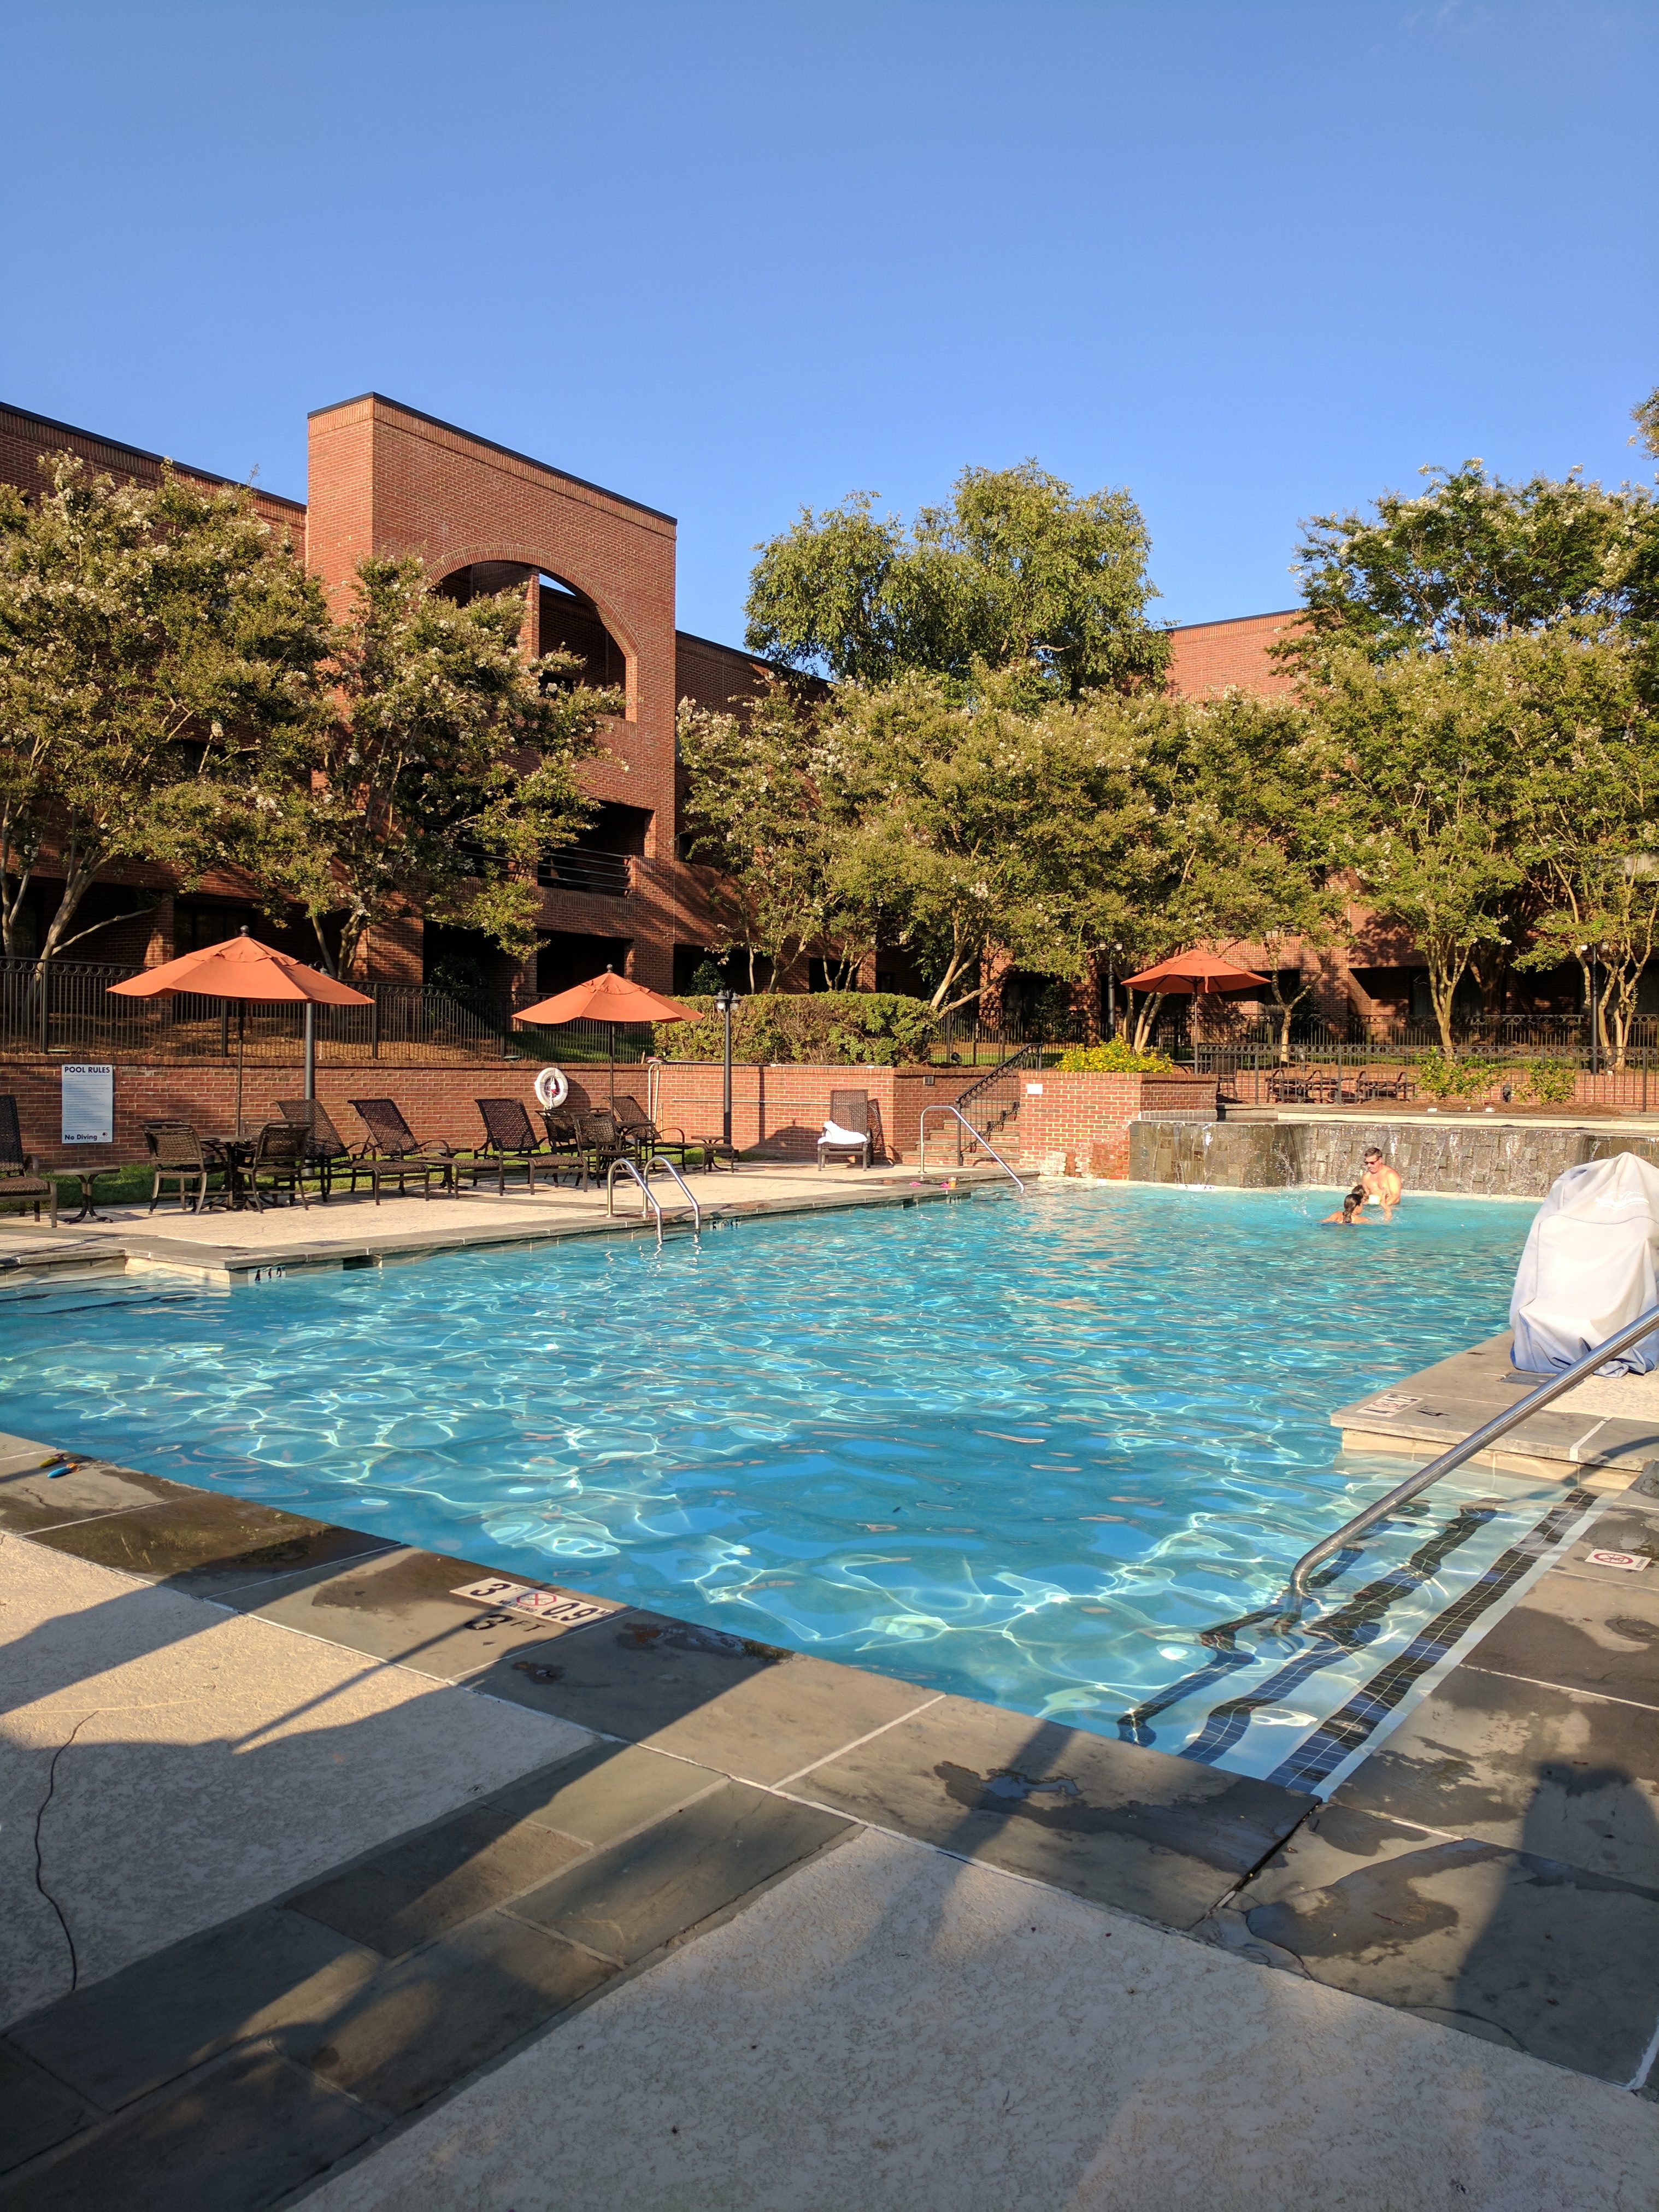 Picture of a place: DoubleTree Suites by Hilton Hotel Charlotte - SouthPark